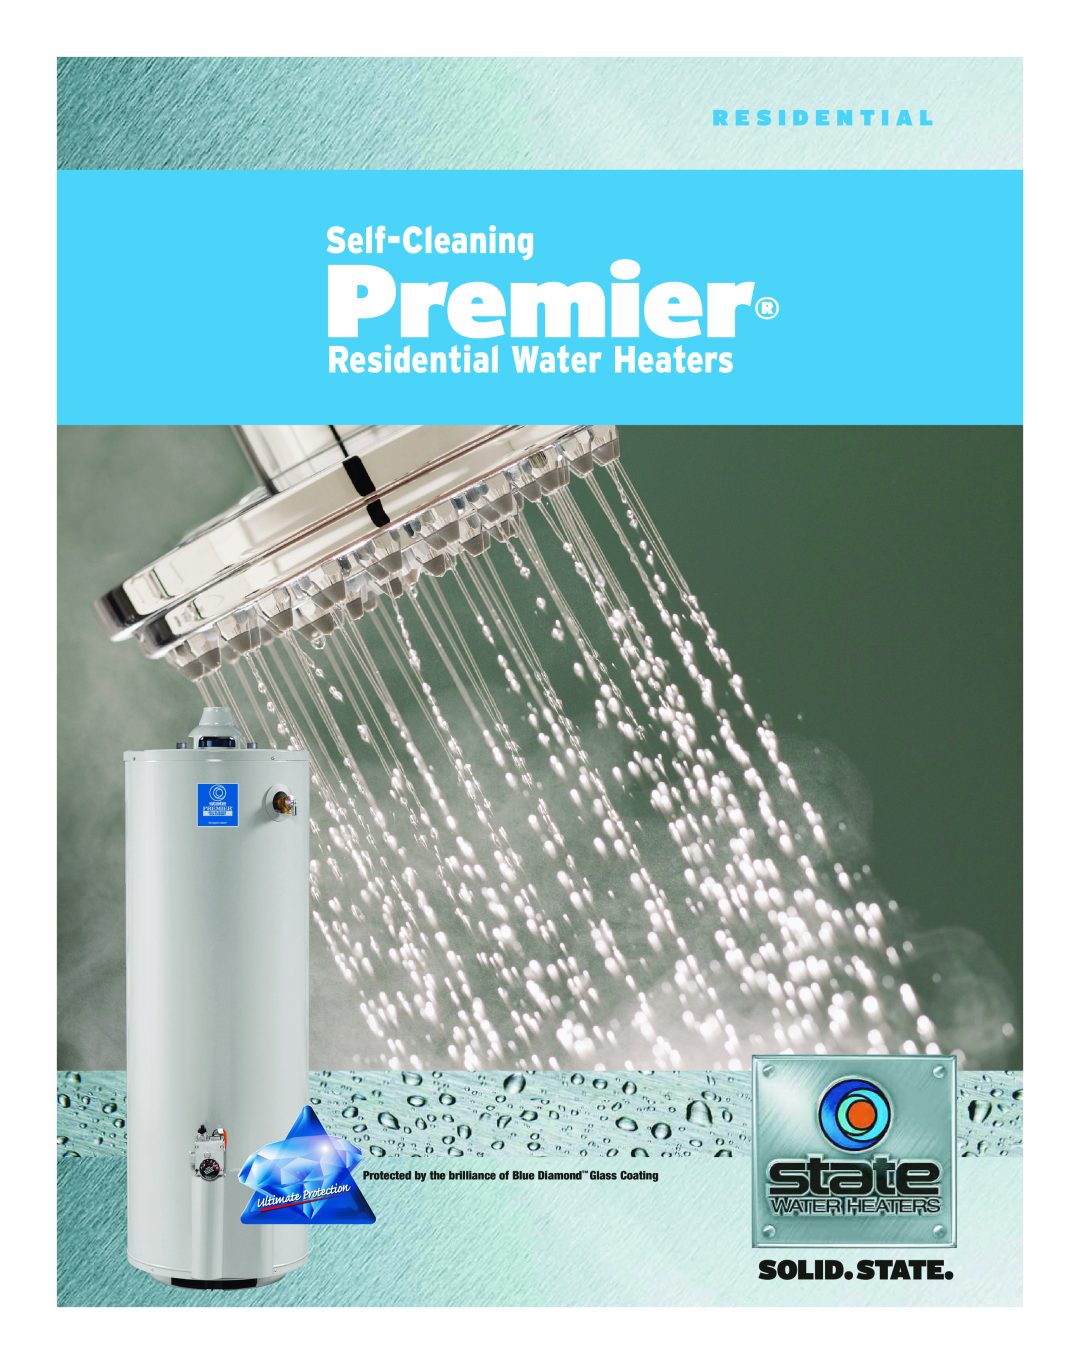 State Industries Residential Water Heaters manual Premier, Self-Cleaning, R E S I D E N T I A L 